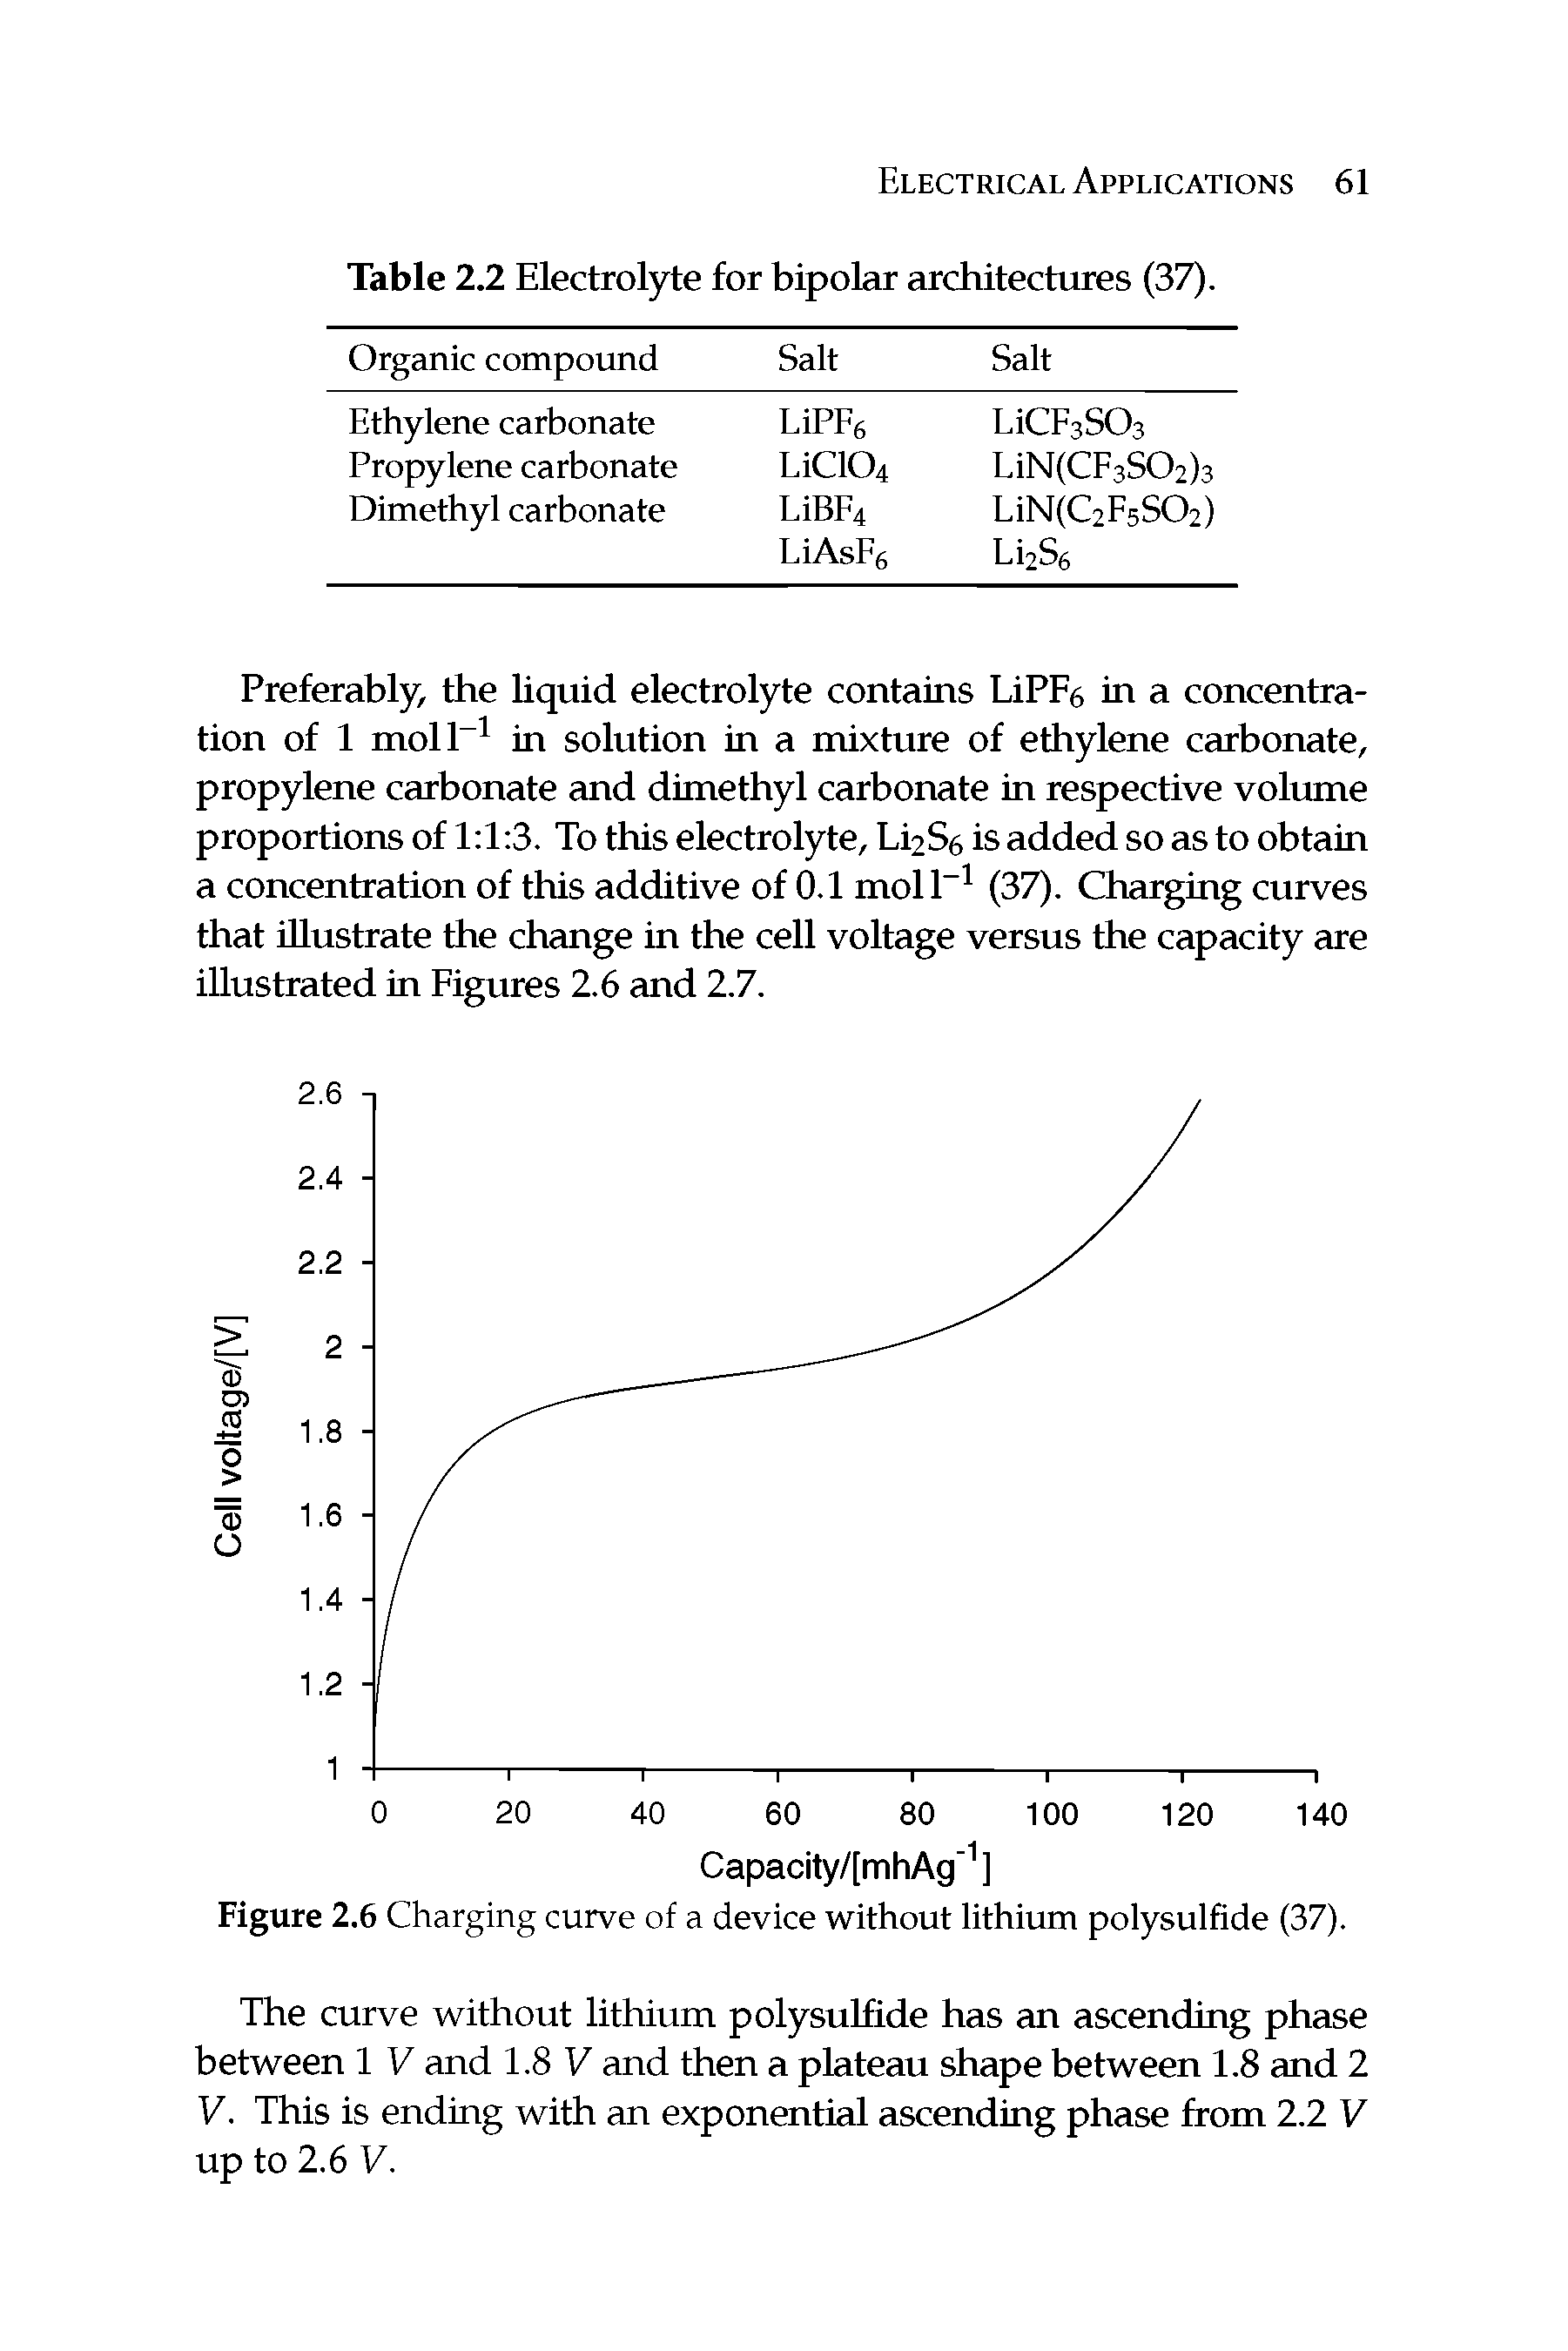 Figure 2.6 Charging curve of a device without lithium polysulfide (37).